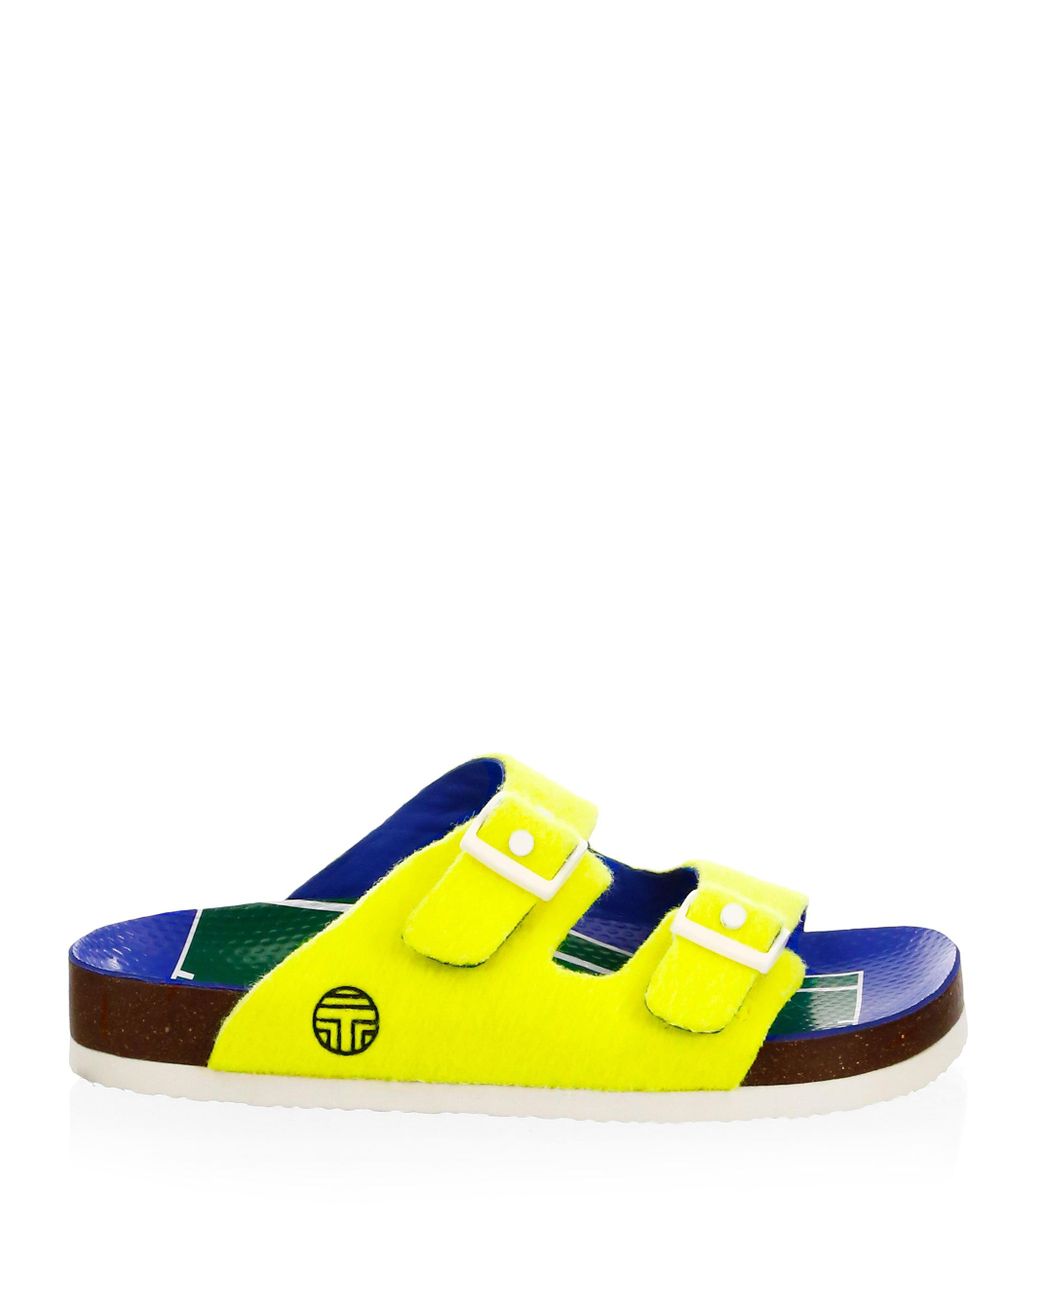 Tory Burch Tennis Buckle Sandals in Yellow | Lyst